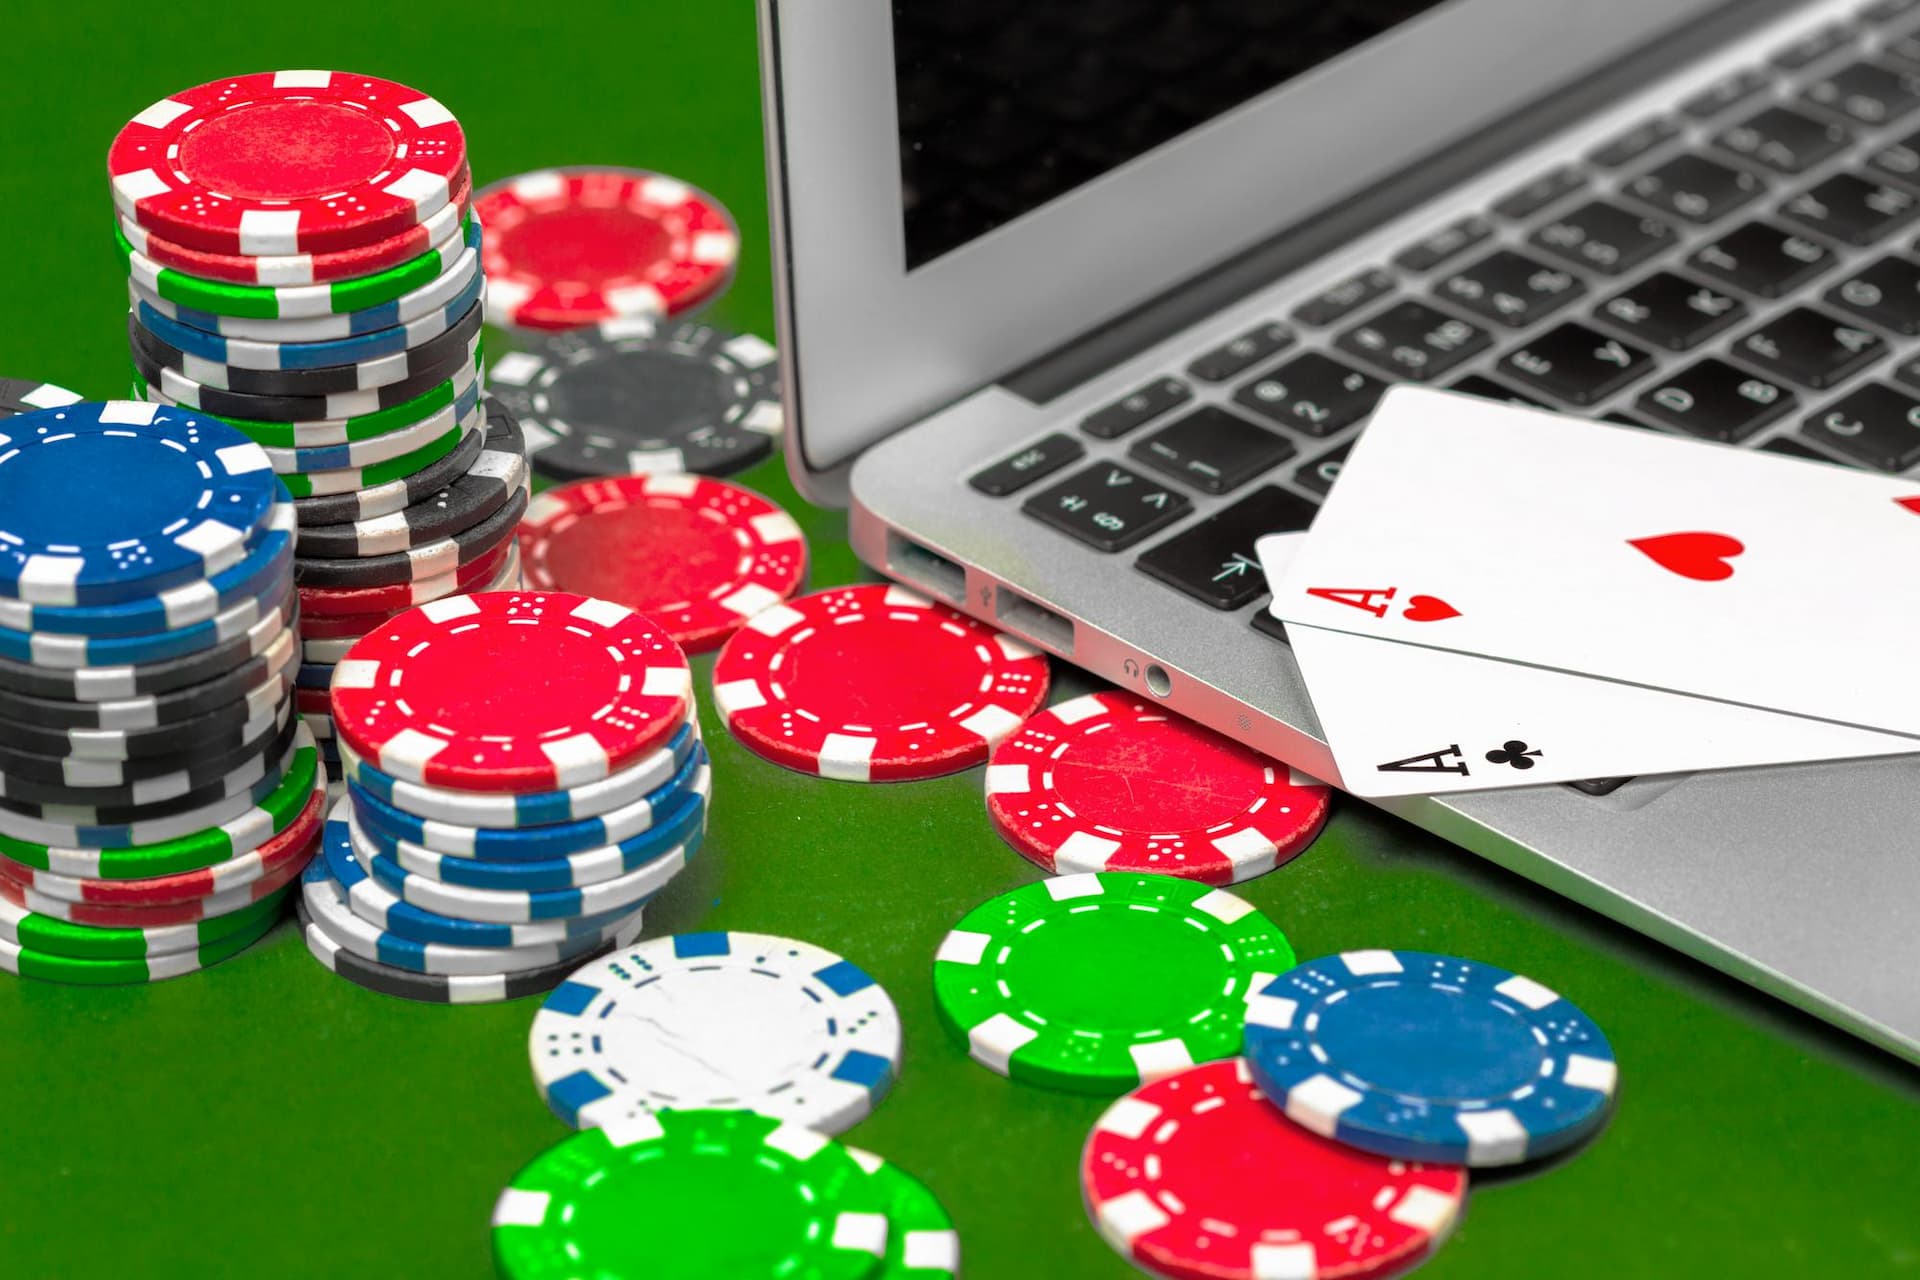 poker-chips-on-the-table (1)